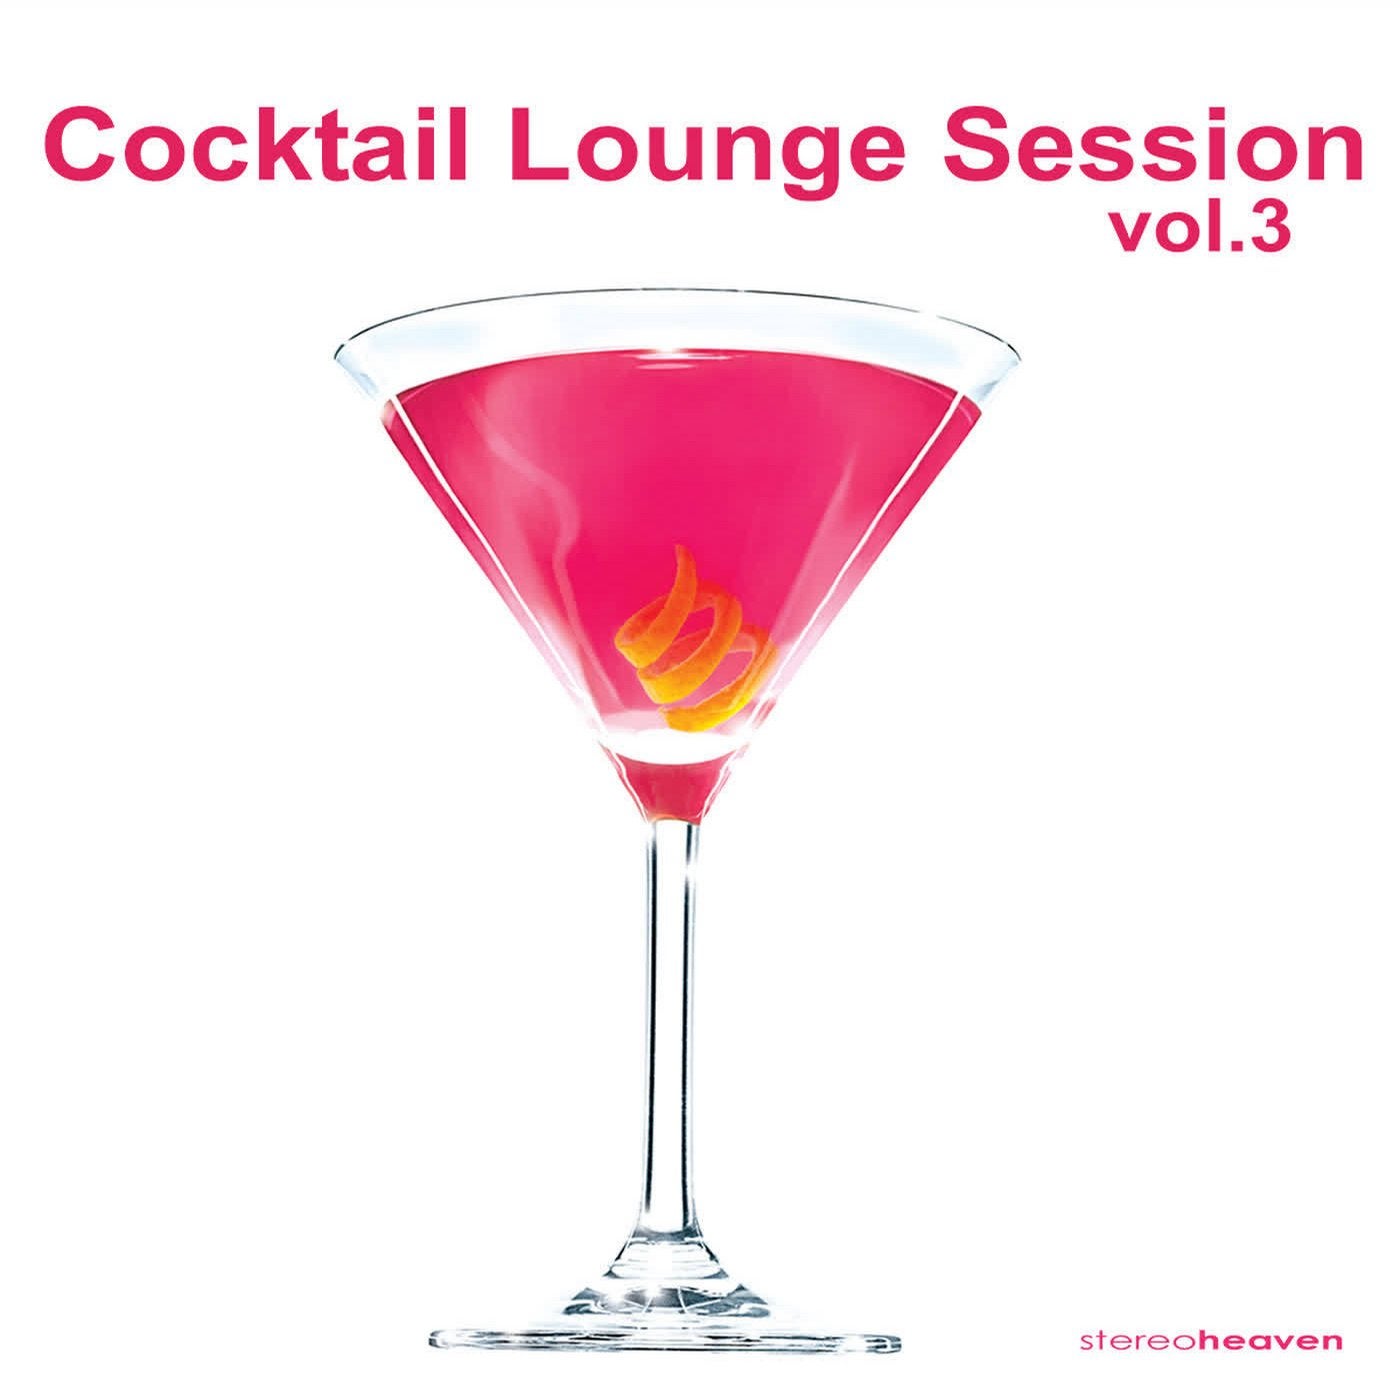 Cocktail Lounge Session Vol.3